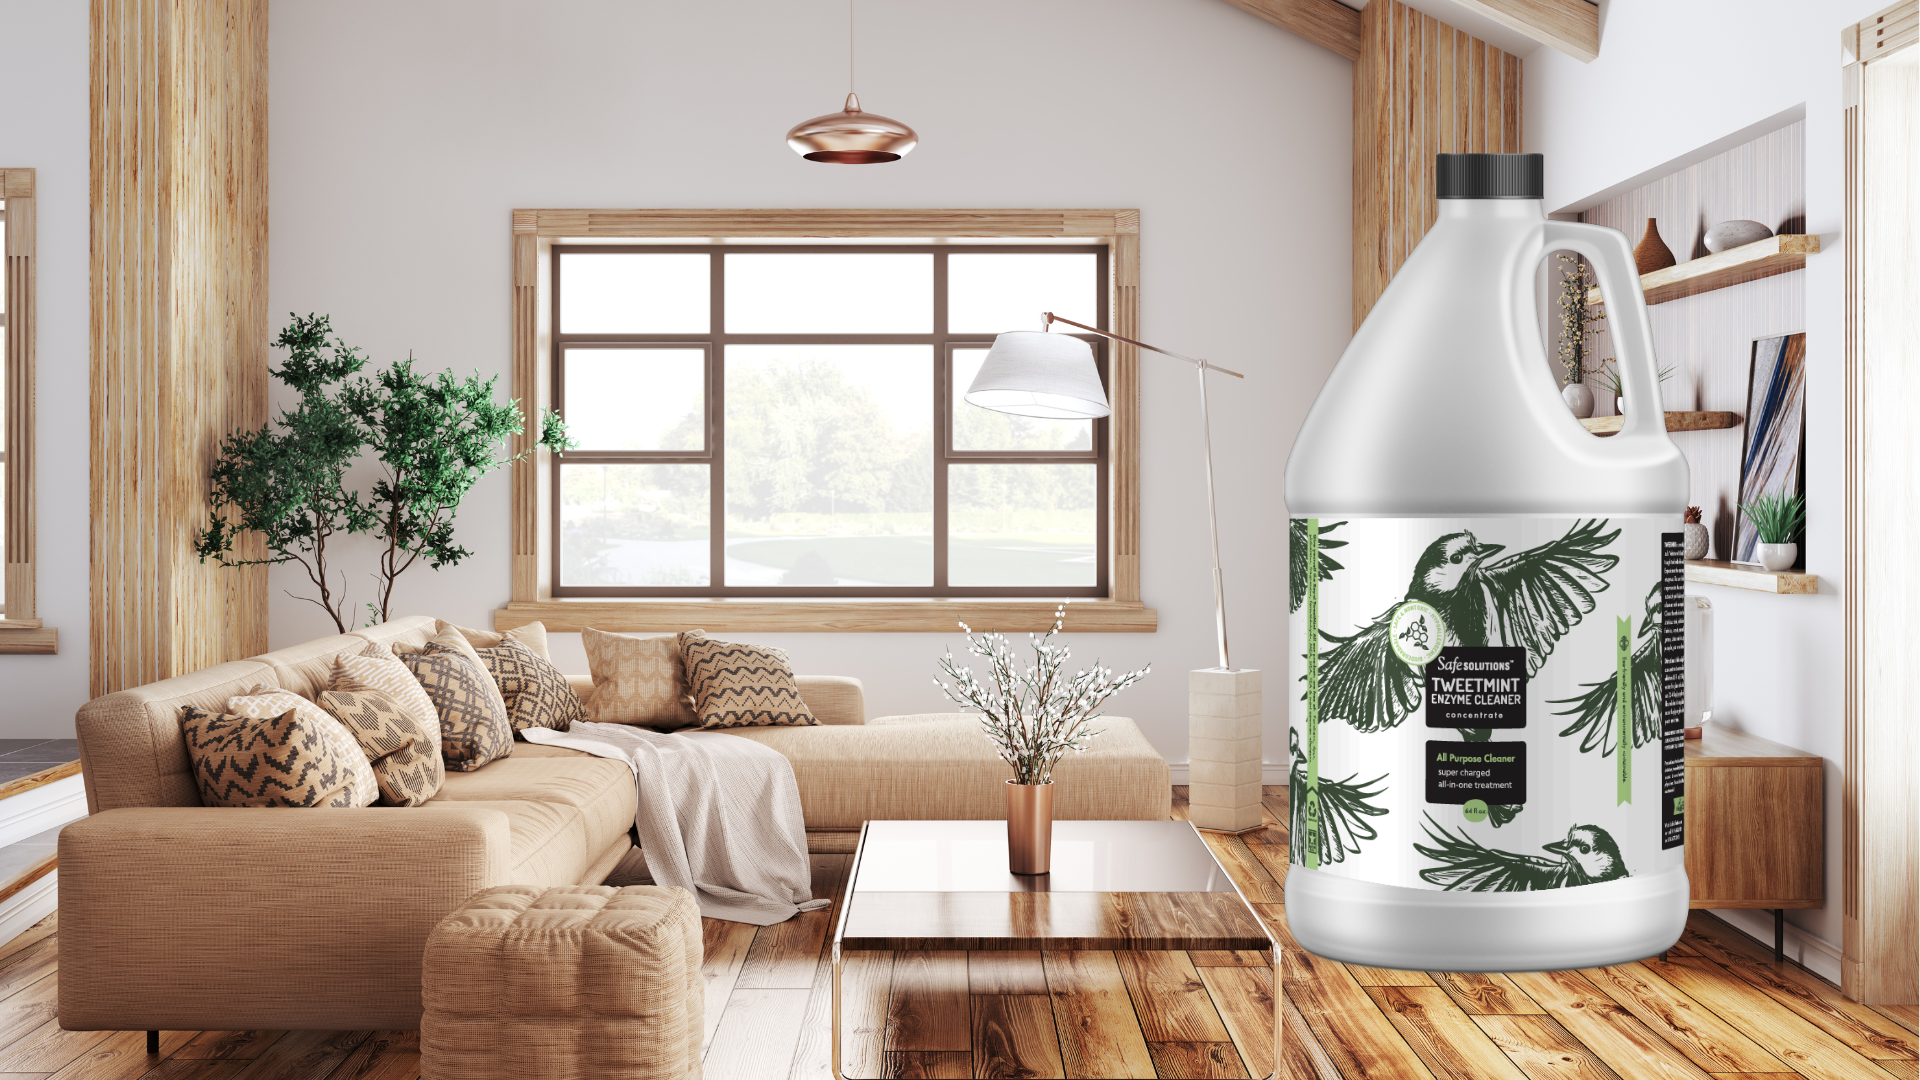 Read more about the article TweetMint 101: Scent-Sationally Clean Living Room